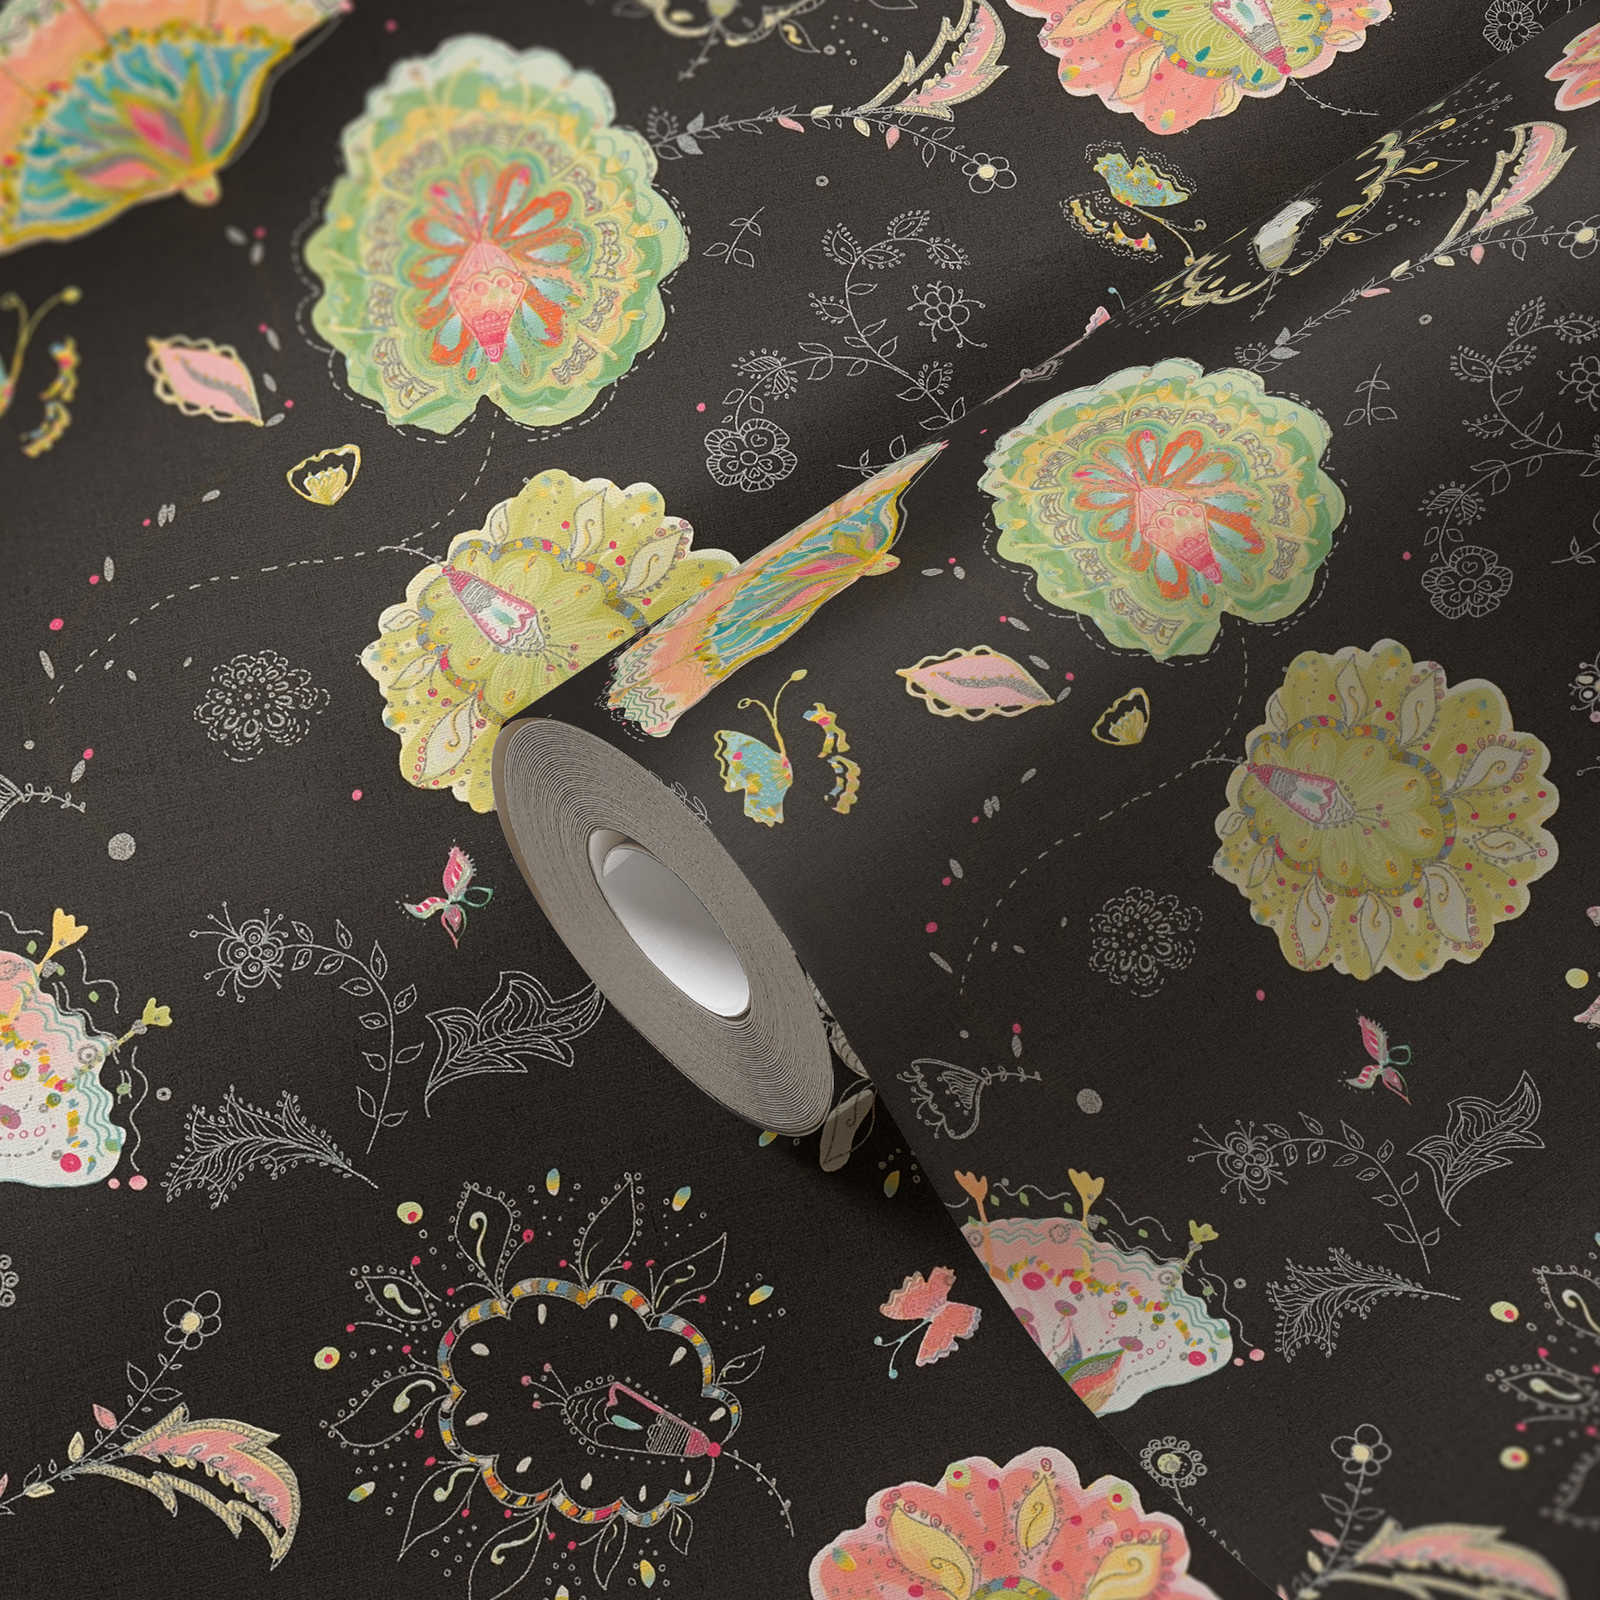             Non-woven wallpaper with floral pattern and light glossy texture - black, green, colourful
        